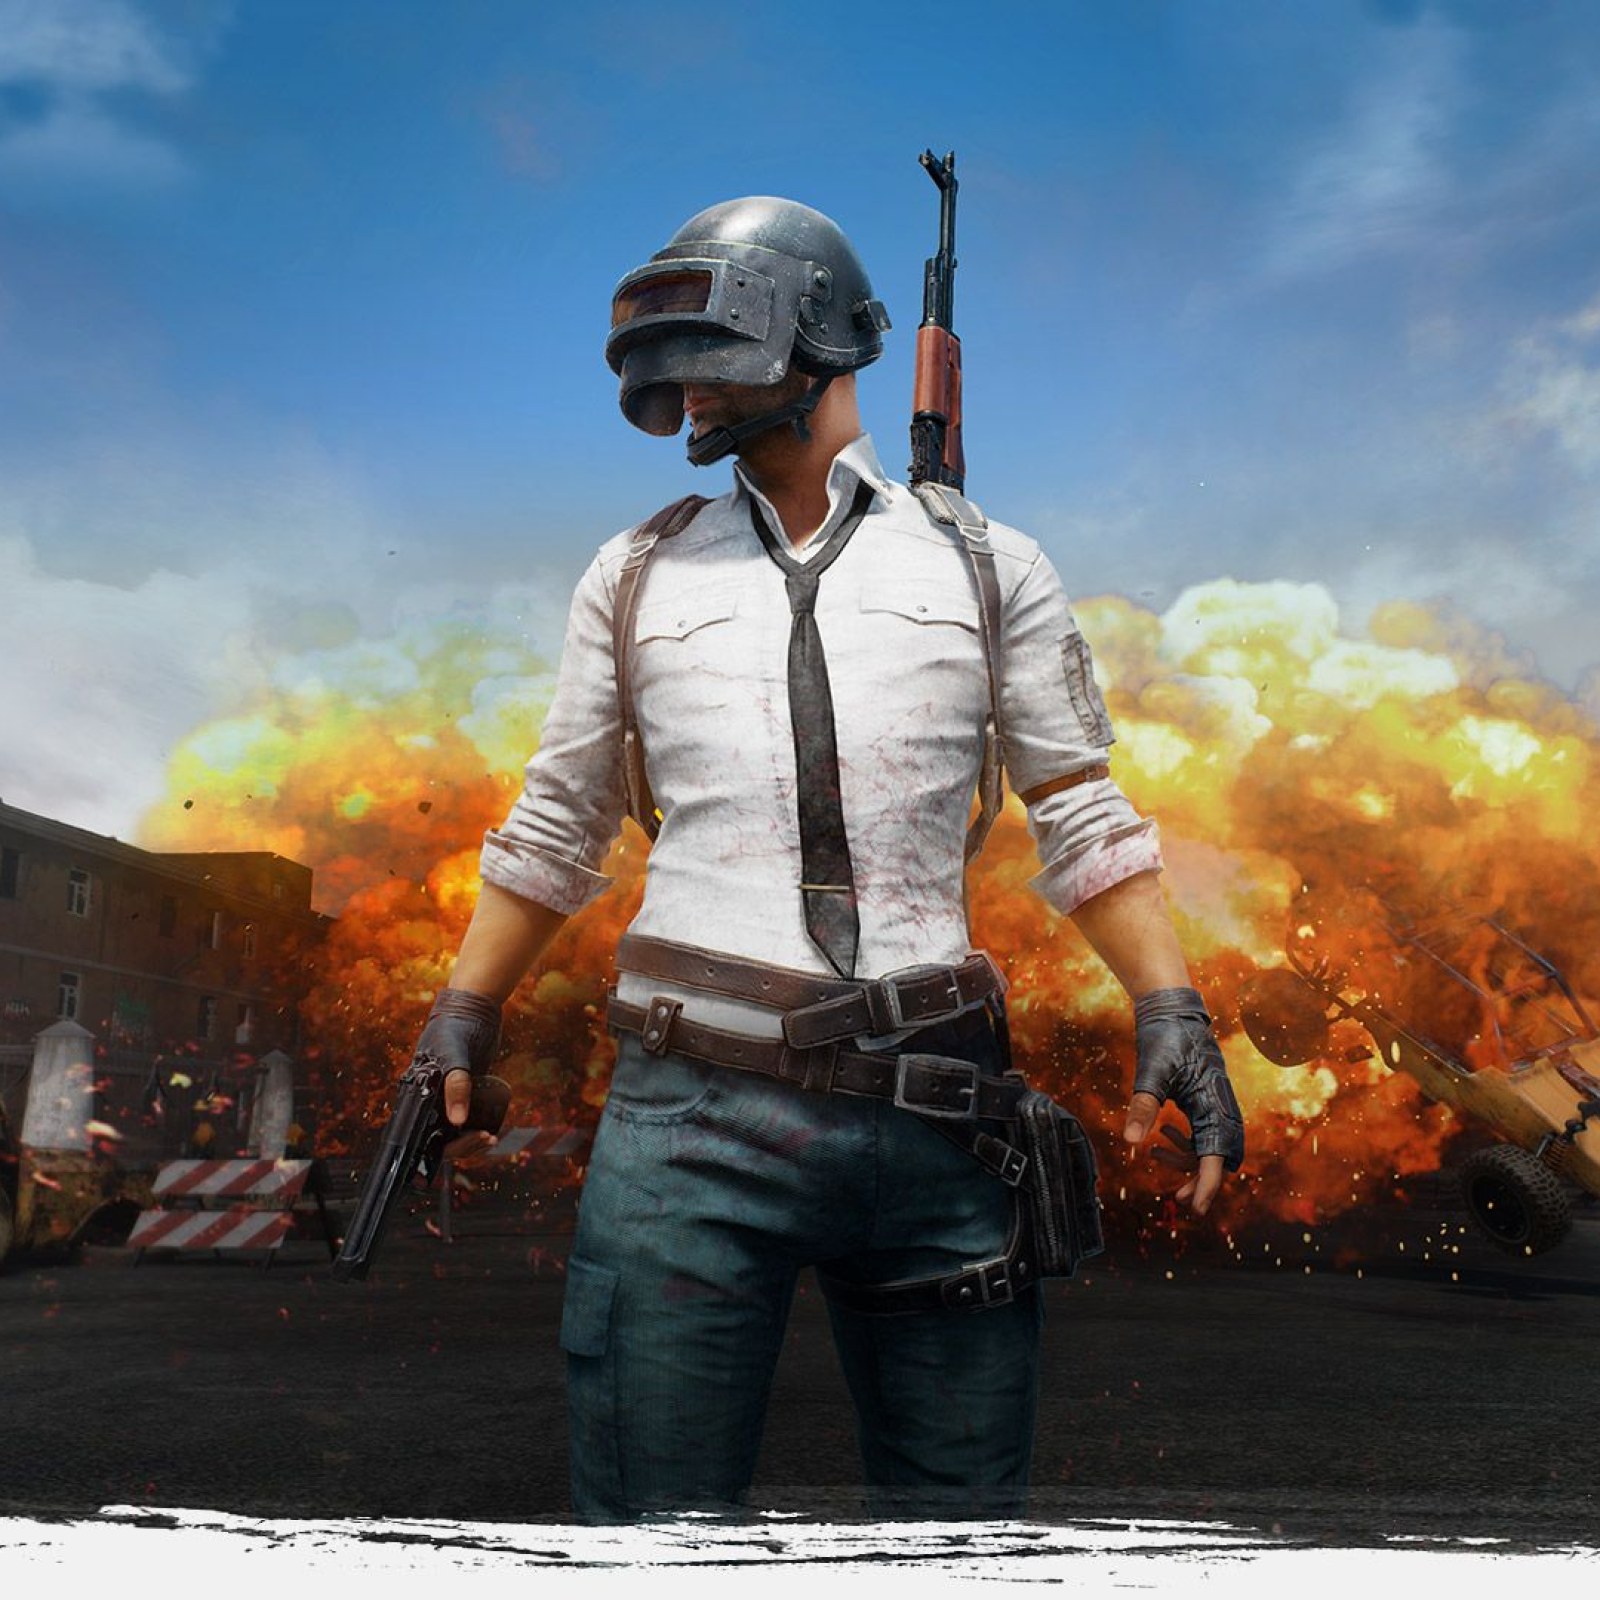 PUBG' Teams Up With DrDisRespect and Shroud for Weapon Skins